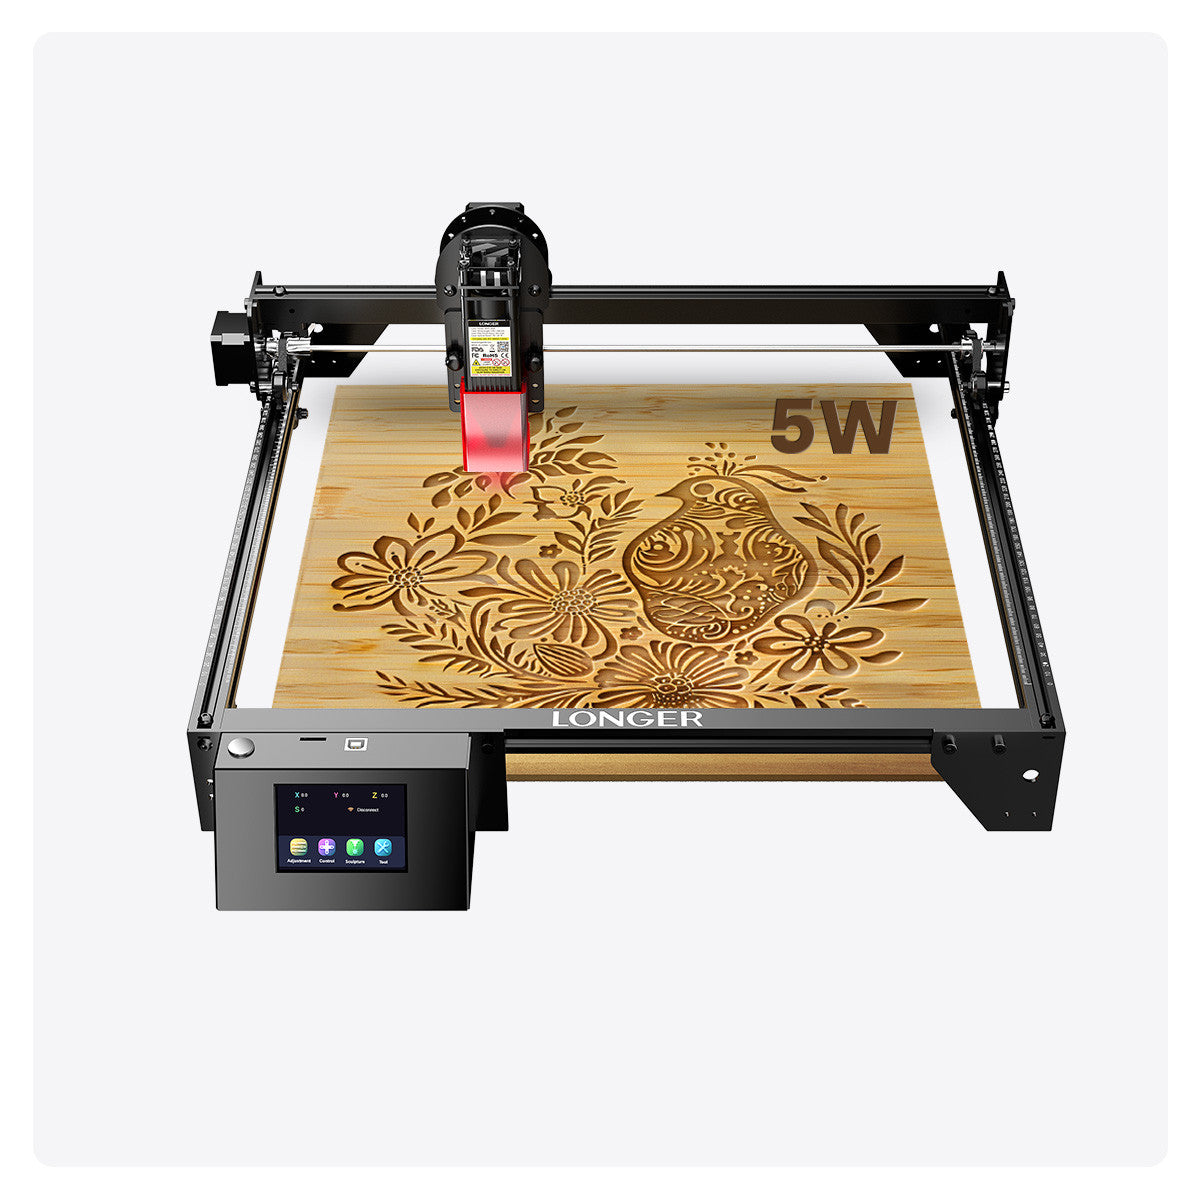 RAY5 5W Laser Engraver